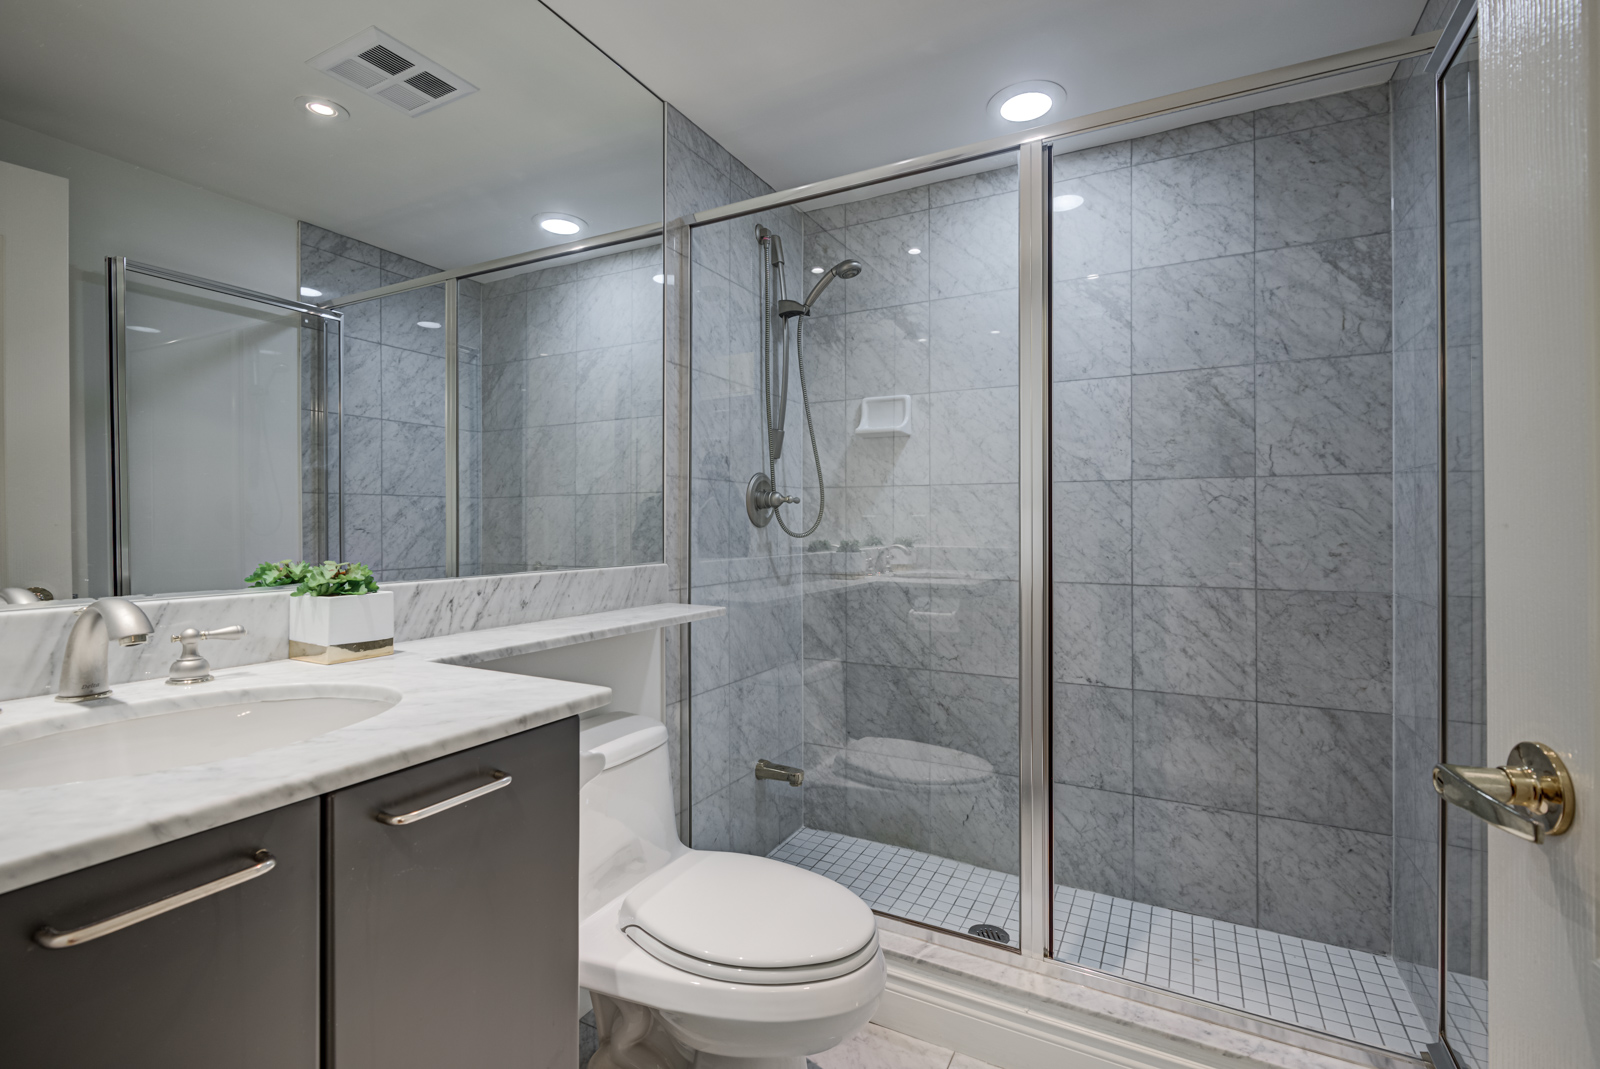 Bathroom in dark grays, lots of glass, and standing shower with detachable showerhead.